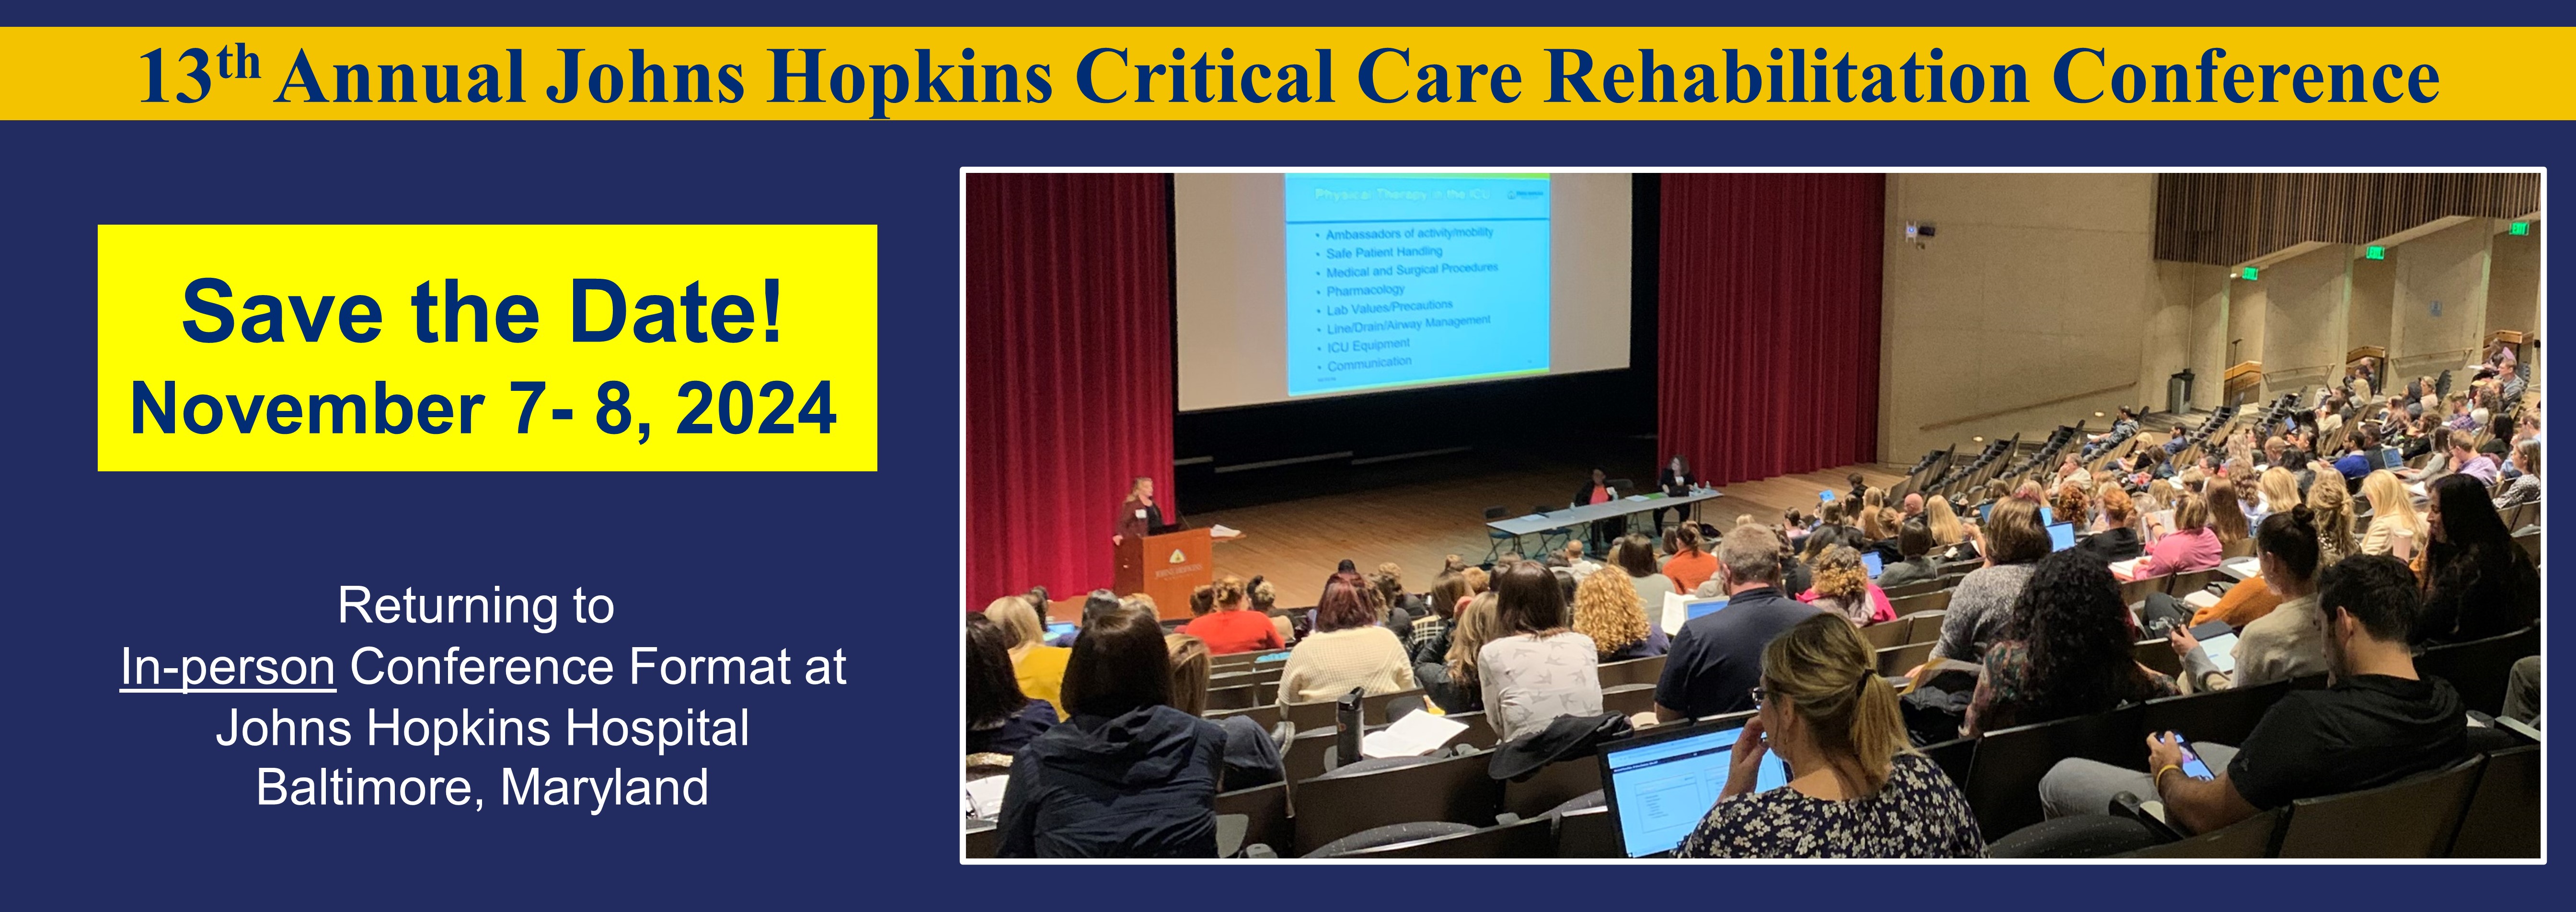 13th Johns Hopkins ICURehab Conference Graphic